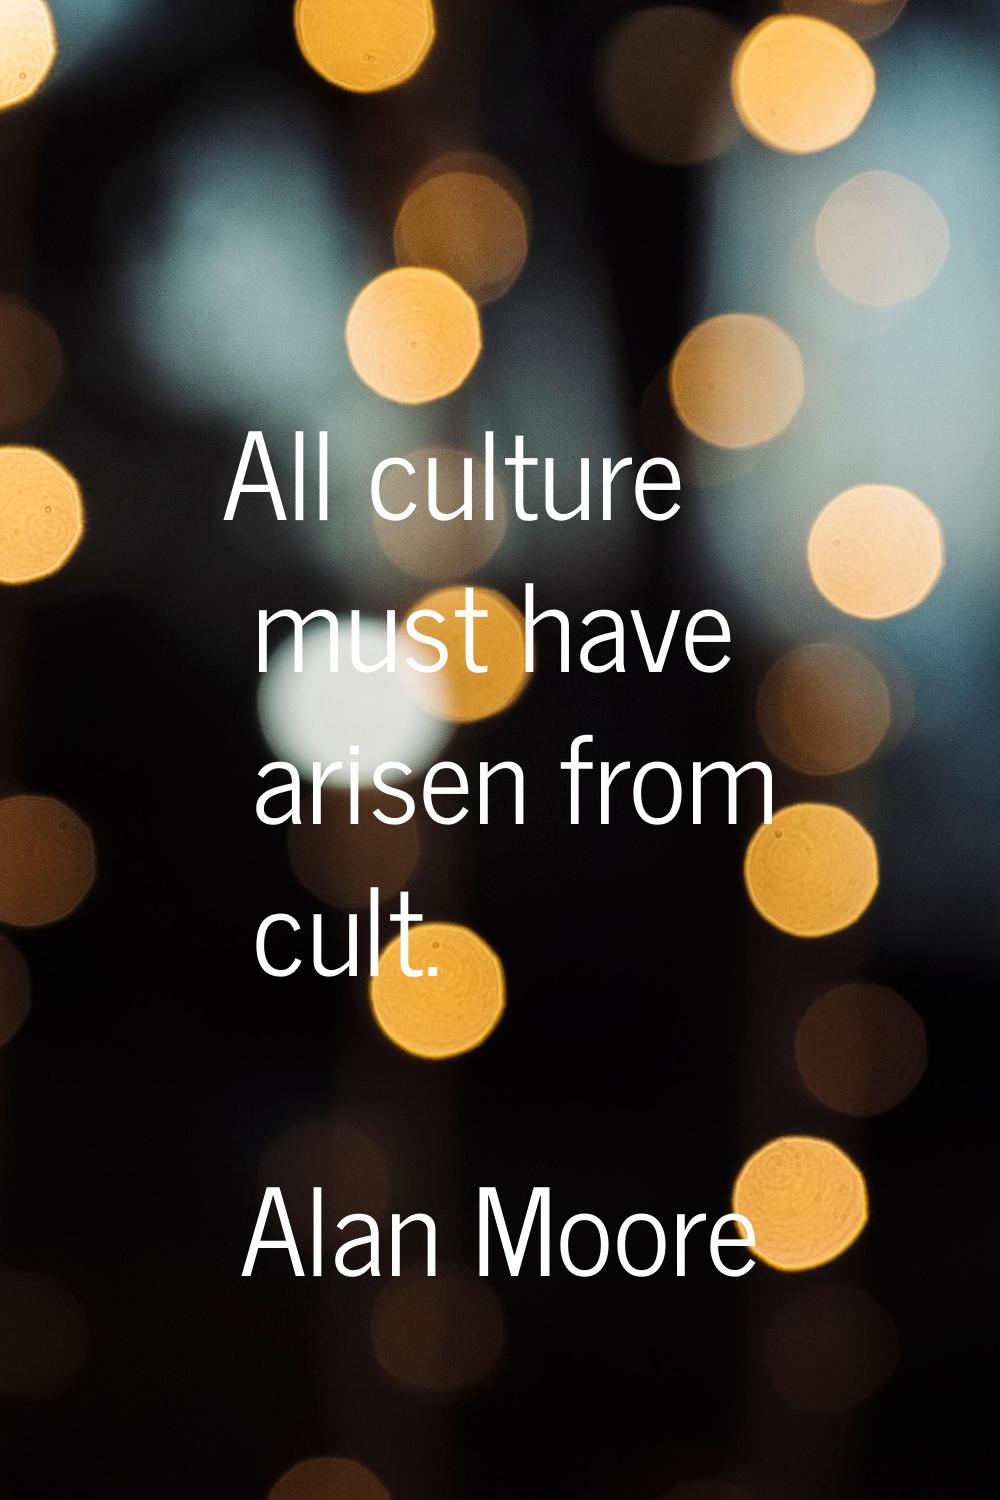 All culture must have arisen from cult.